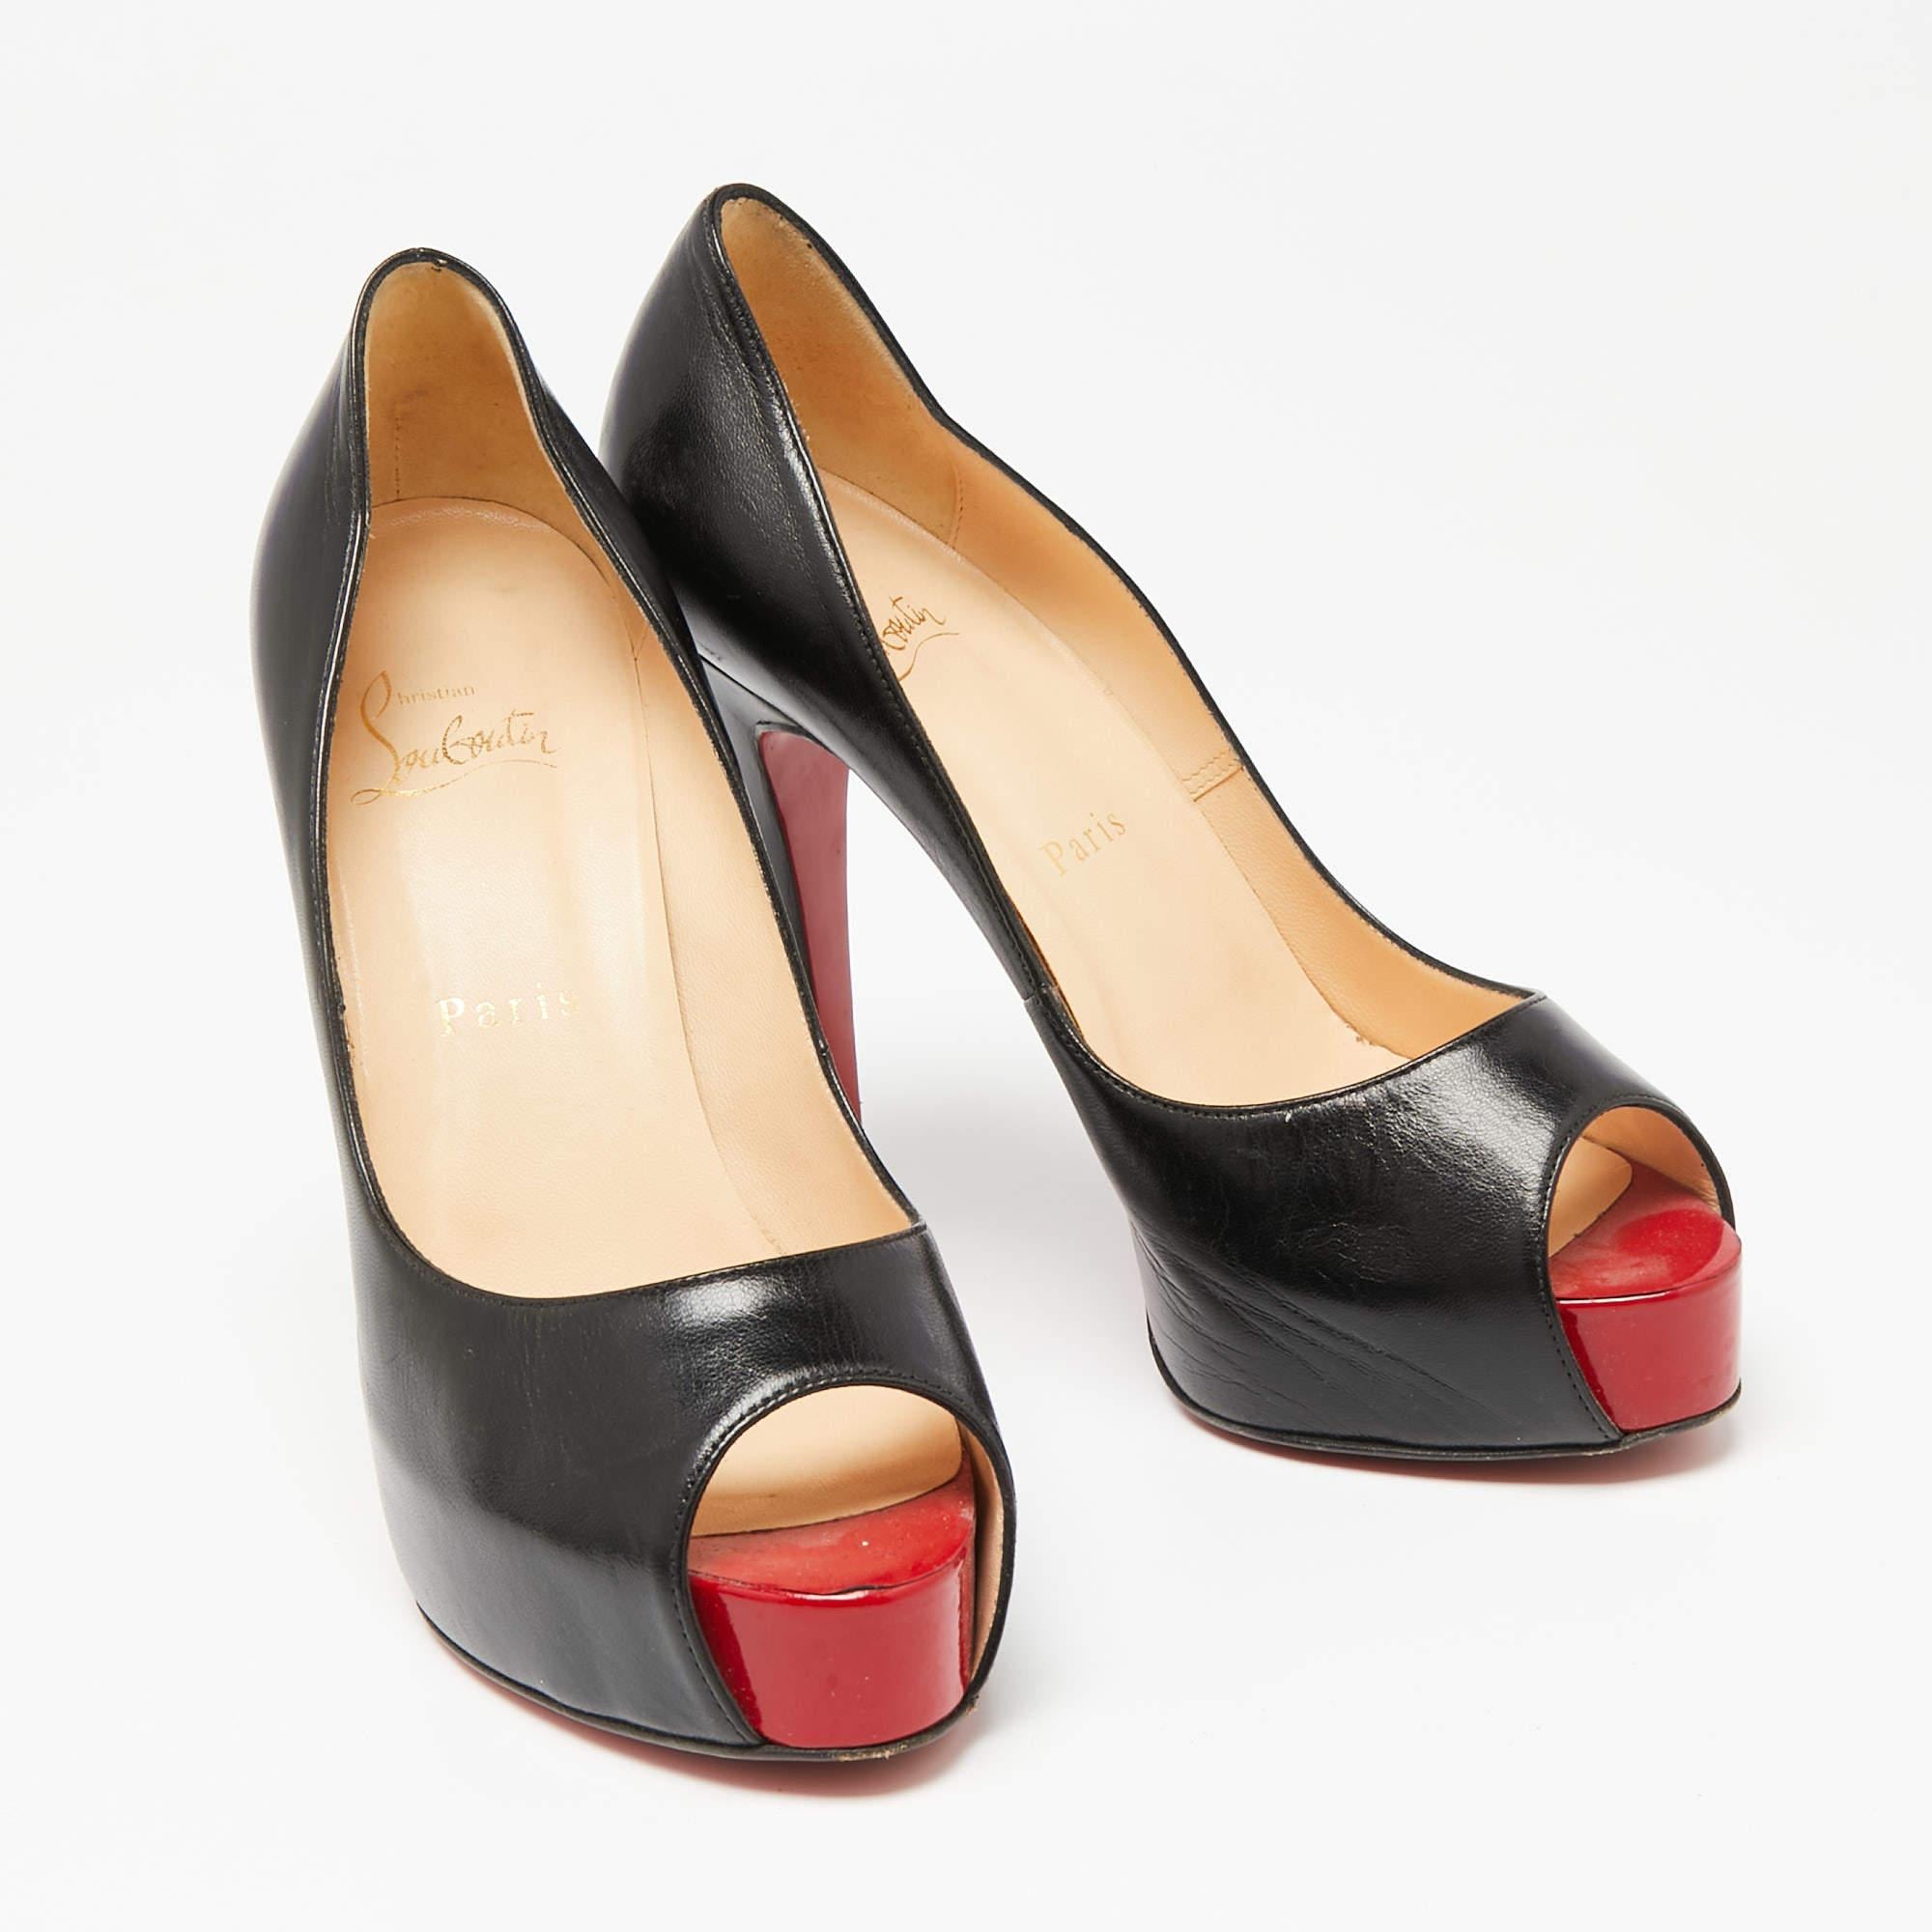 The architectural silhouette and precise cuts of this pair of pumps from Christian Louboutin exemplify the brand's mastery in the art of stiletto making. Finely created from leather, it is detailed with 12cm heels and peep toes. The signature